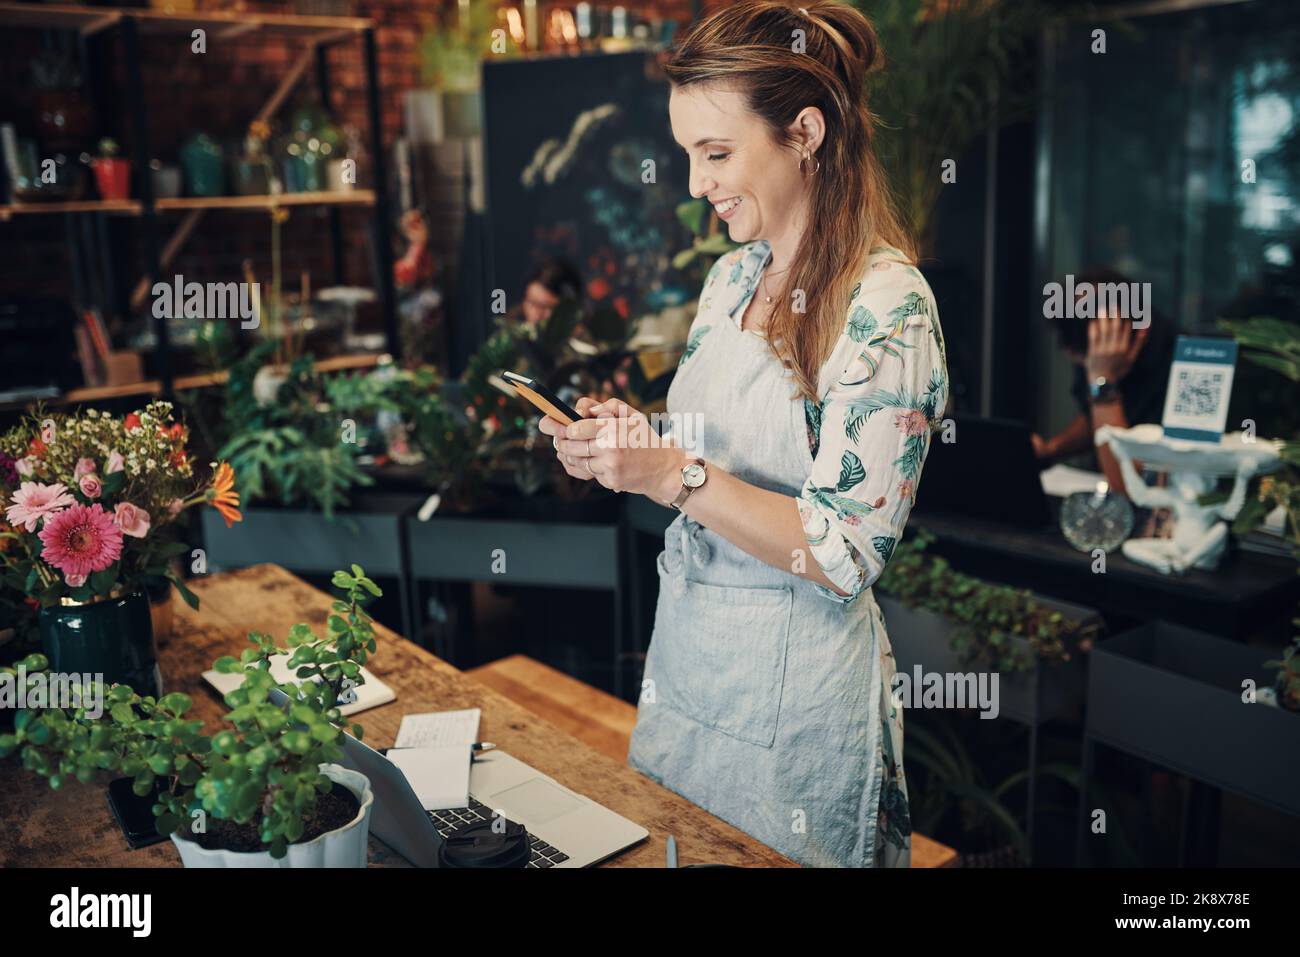 Updating my social media. an attractive young businesswoman standing in her floristry and using her cellphone to photograph her flowers. Stock Photo